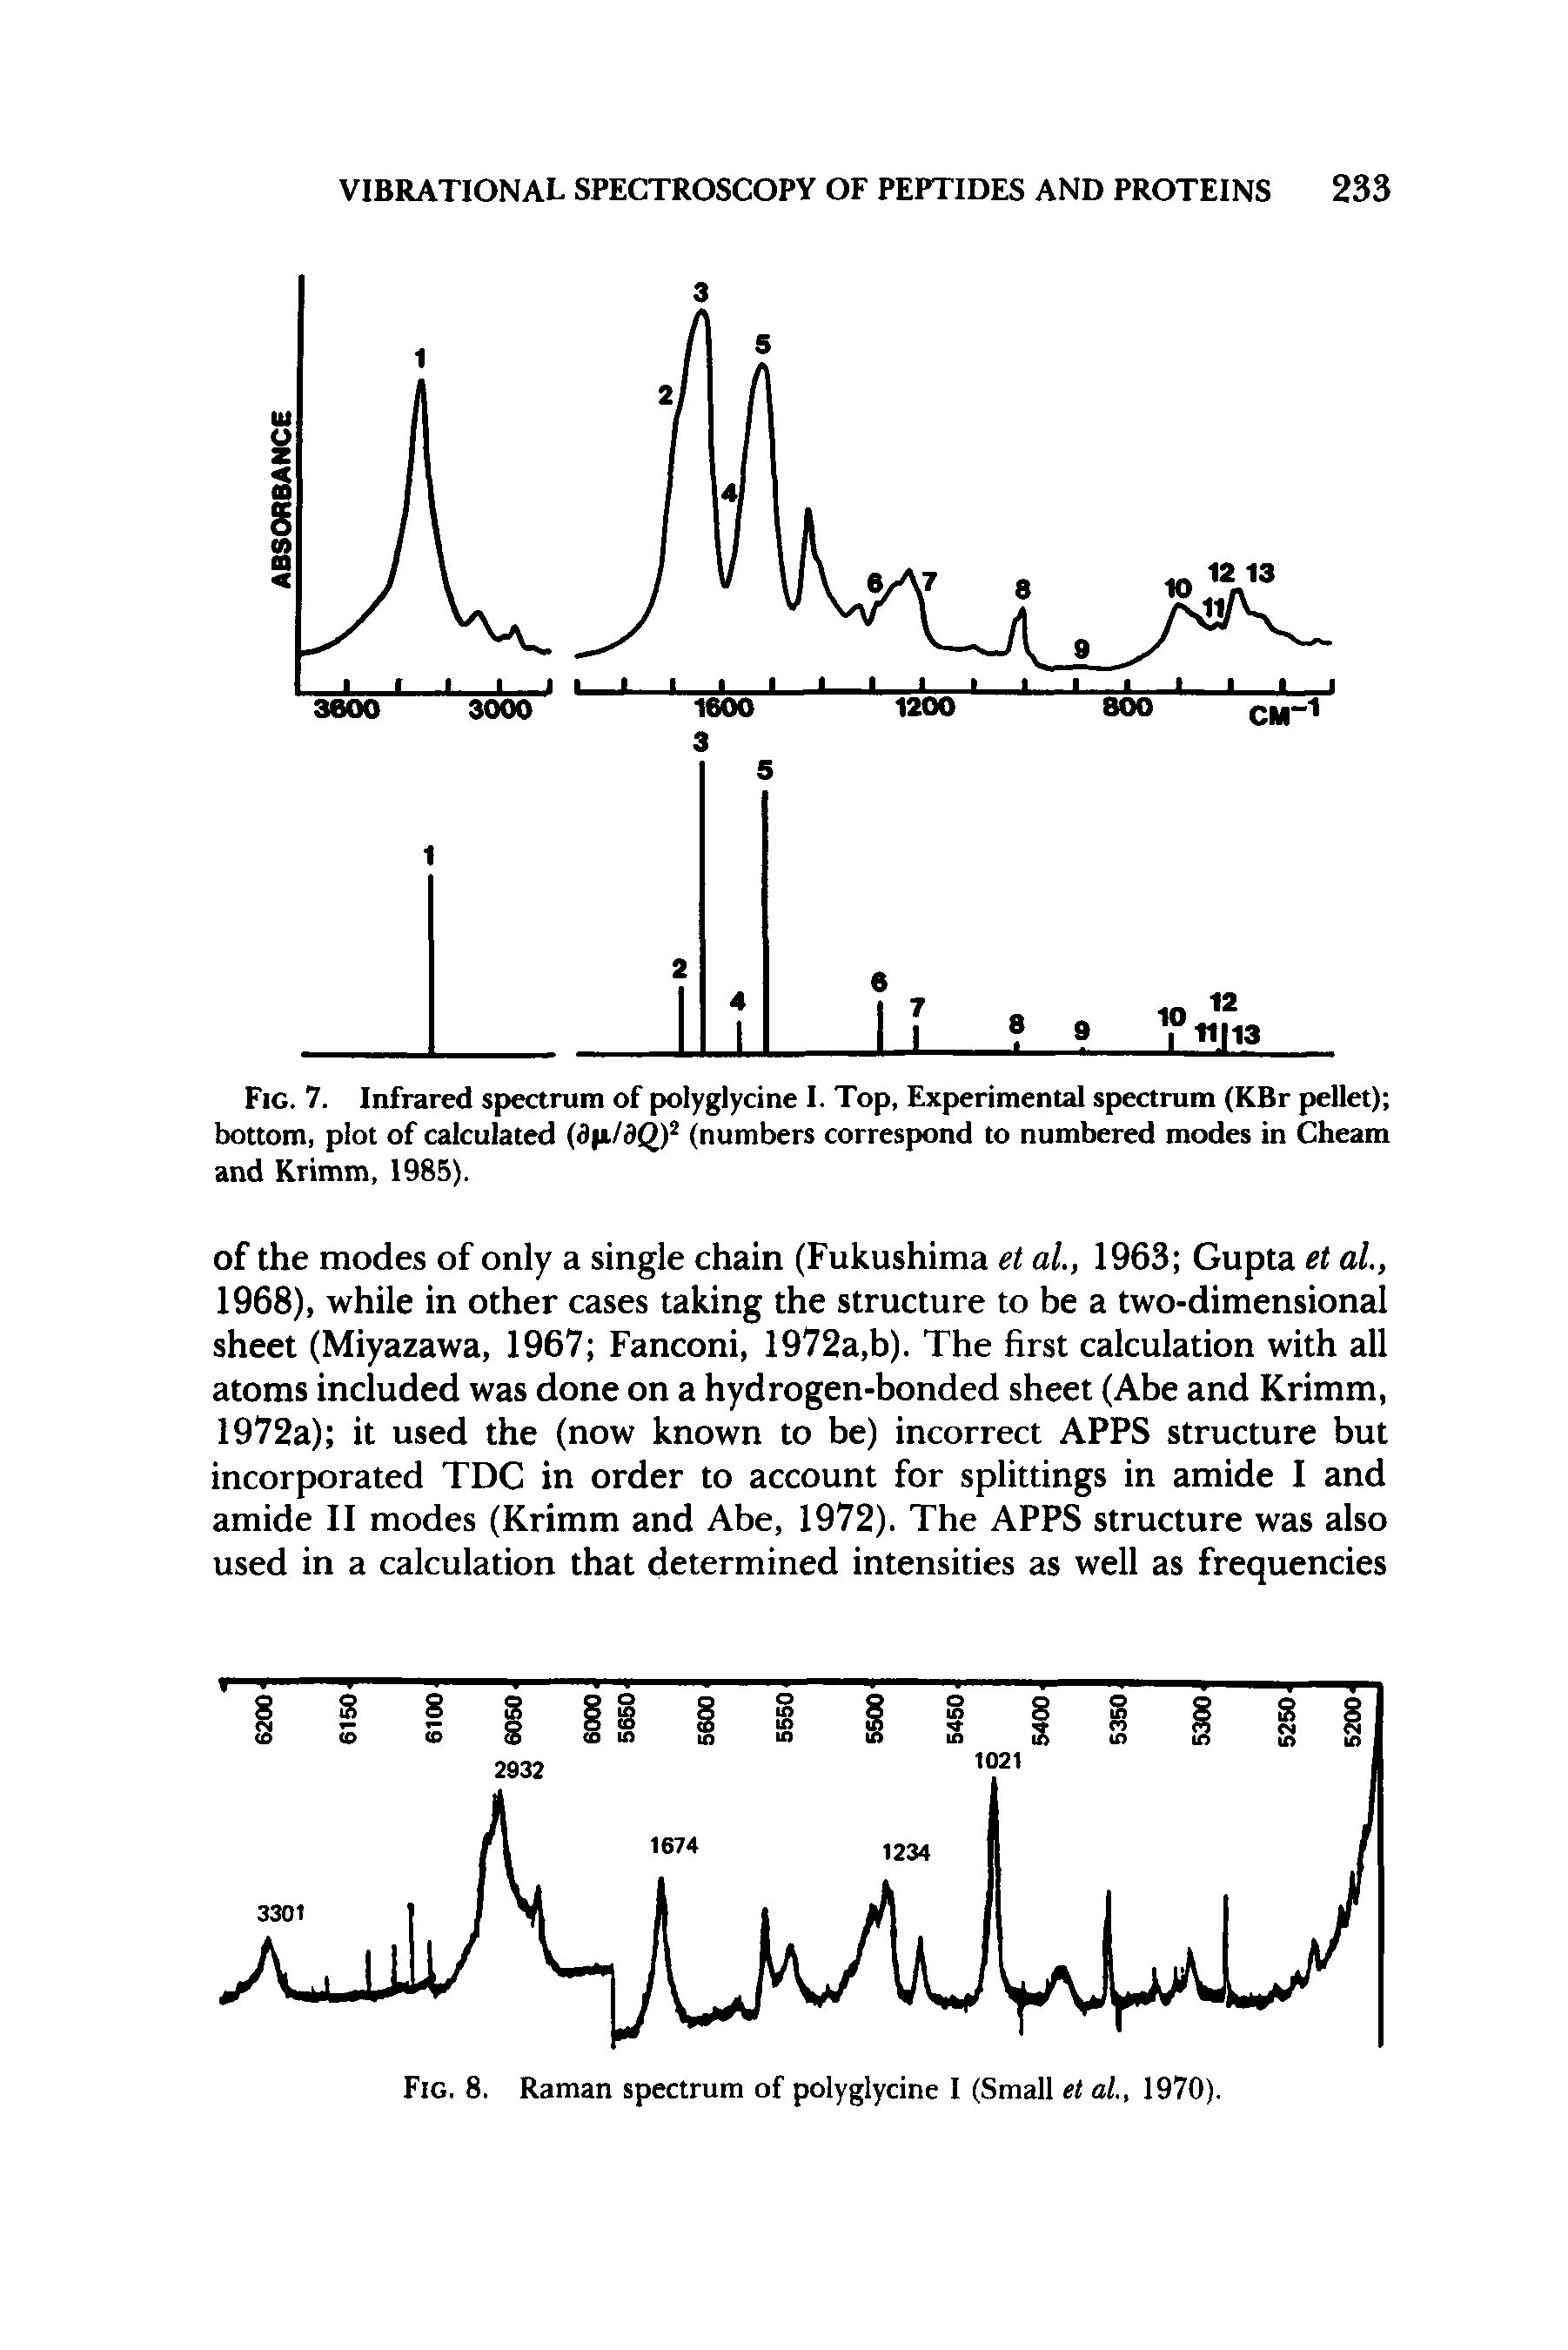 Fig. 7. Infrared spectrum of polyglycine I. Top, Experimental spectrum (KBr pellet) bottom, plot of calculated (flji/aQ) (numbers correspond to numbered modes in Cheam and Krimm, 1985).